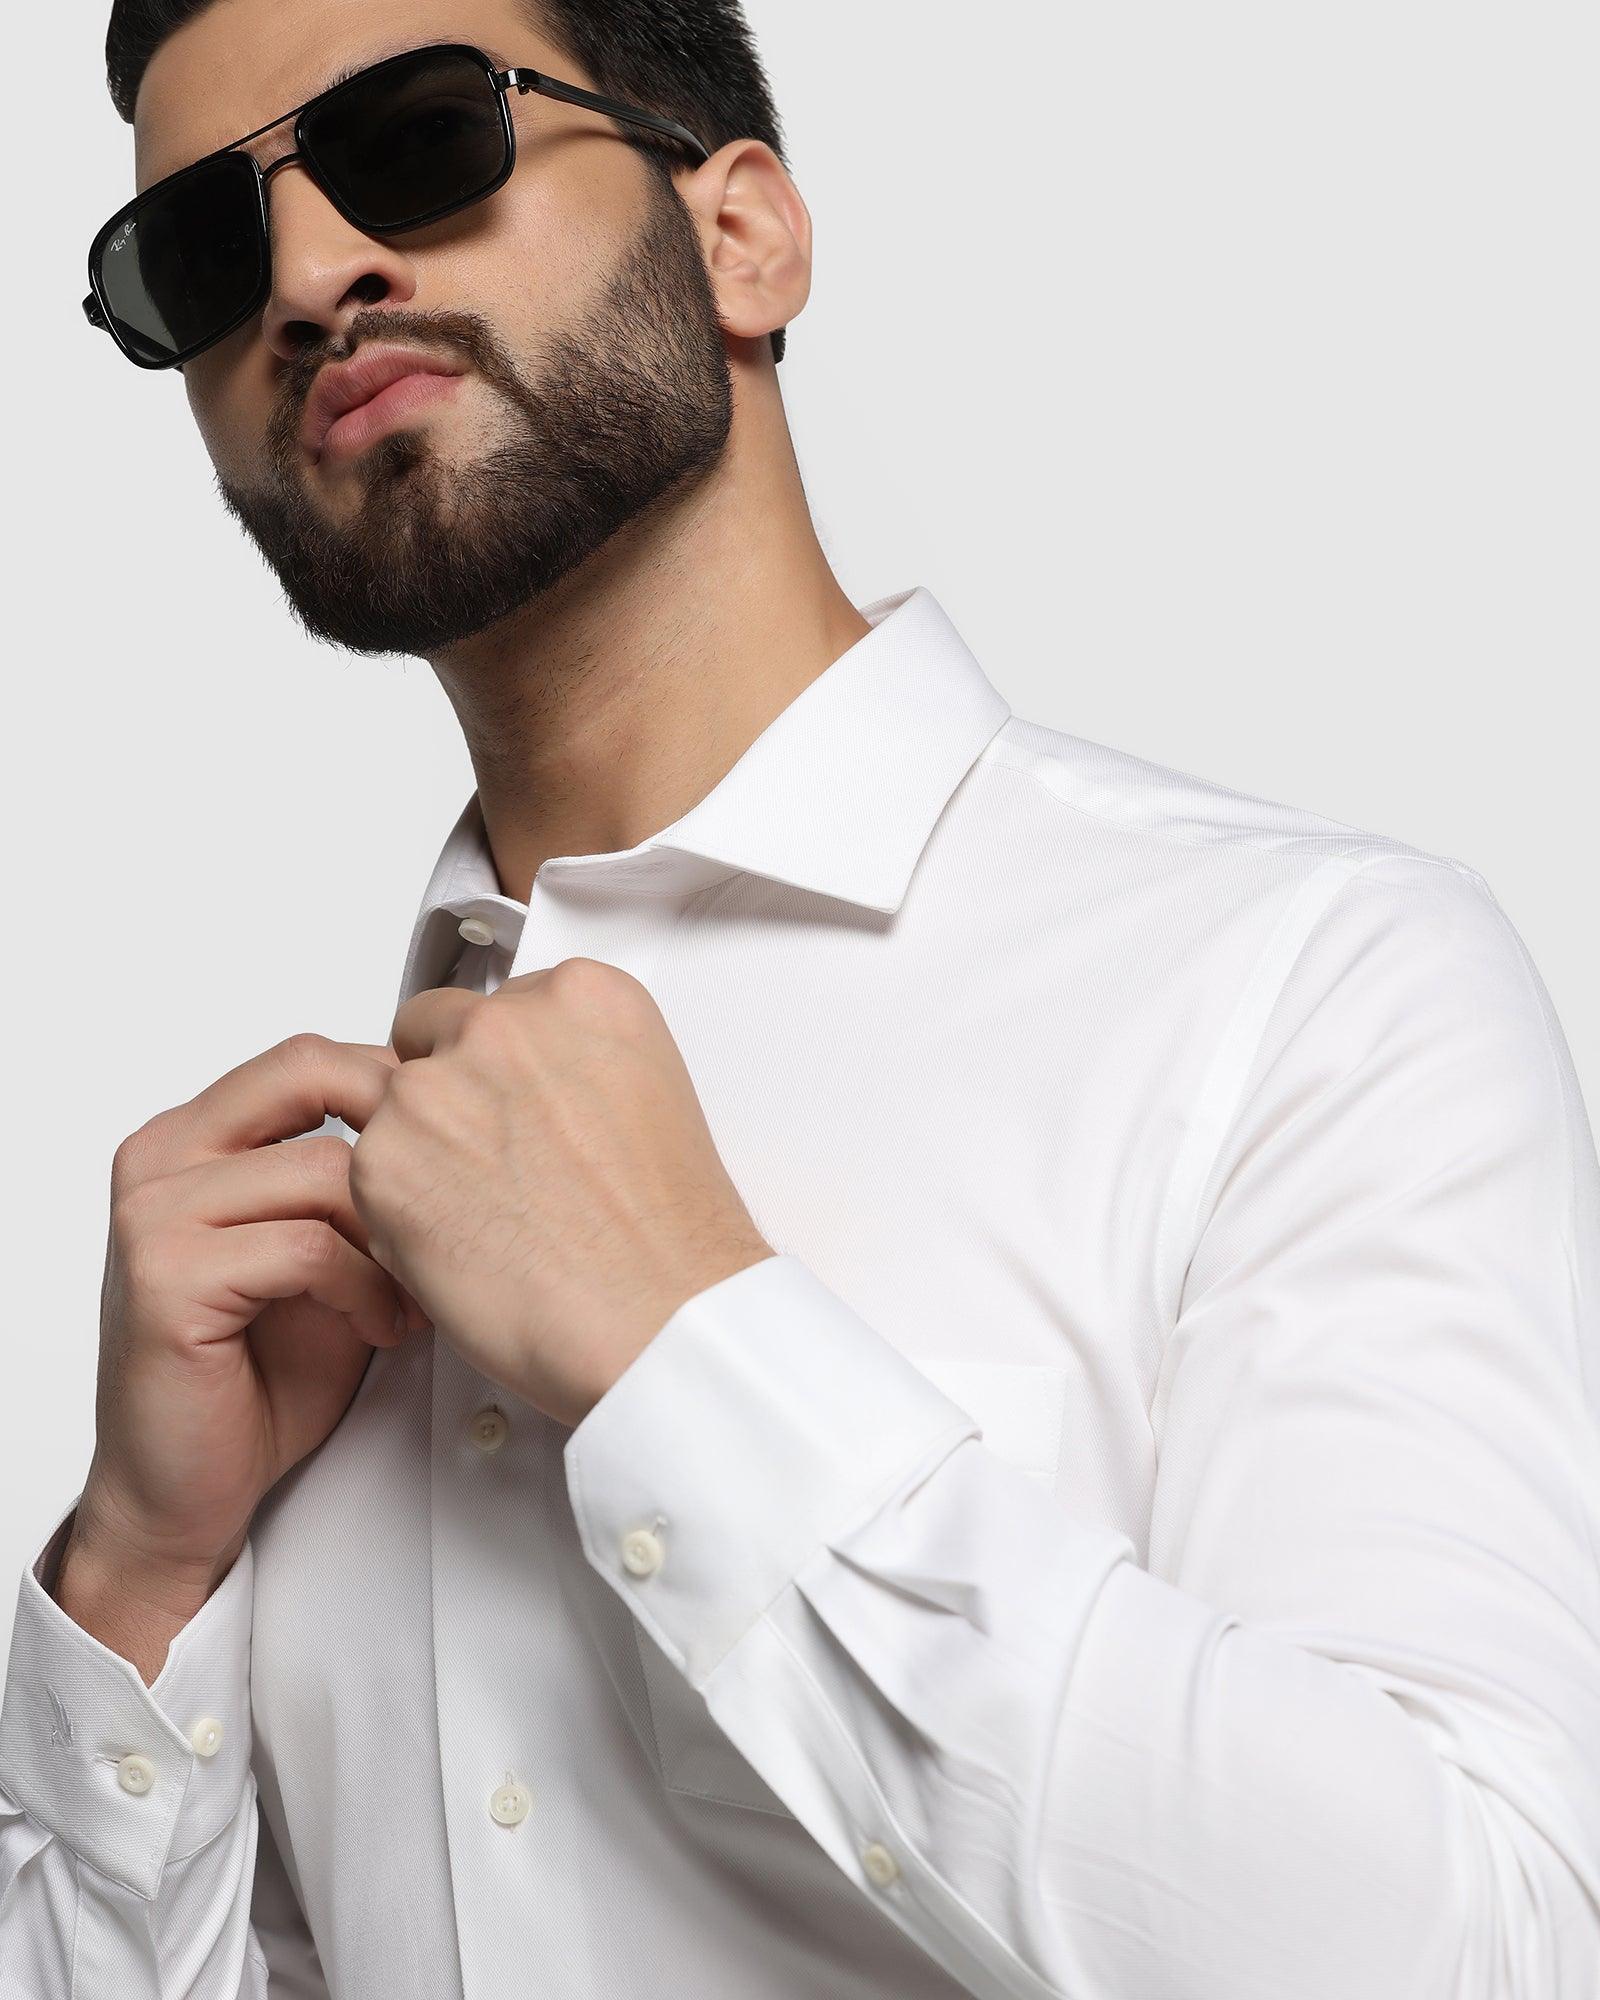 Formal White Textured Shirt - Marco